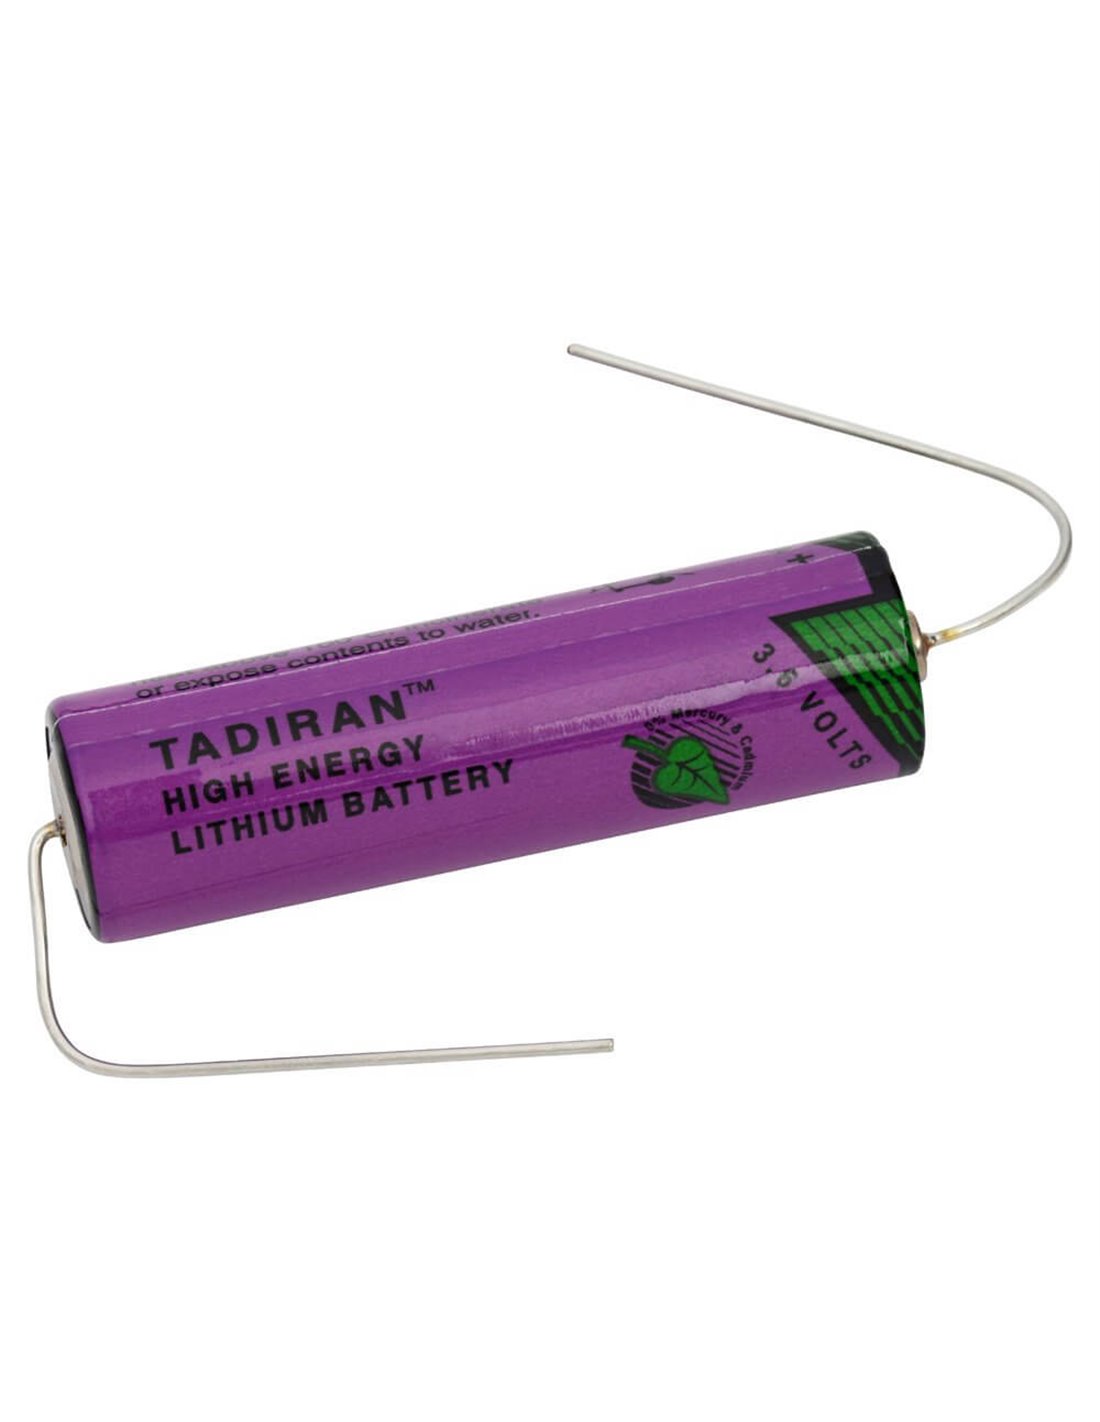 Tadiran TL-5903, TL5104, AA 3.6V AA Lithium Battery (ER14505) 3.6V - Non Rechargeable